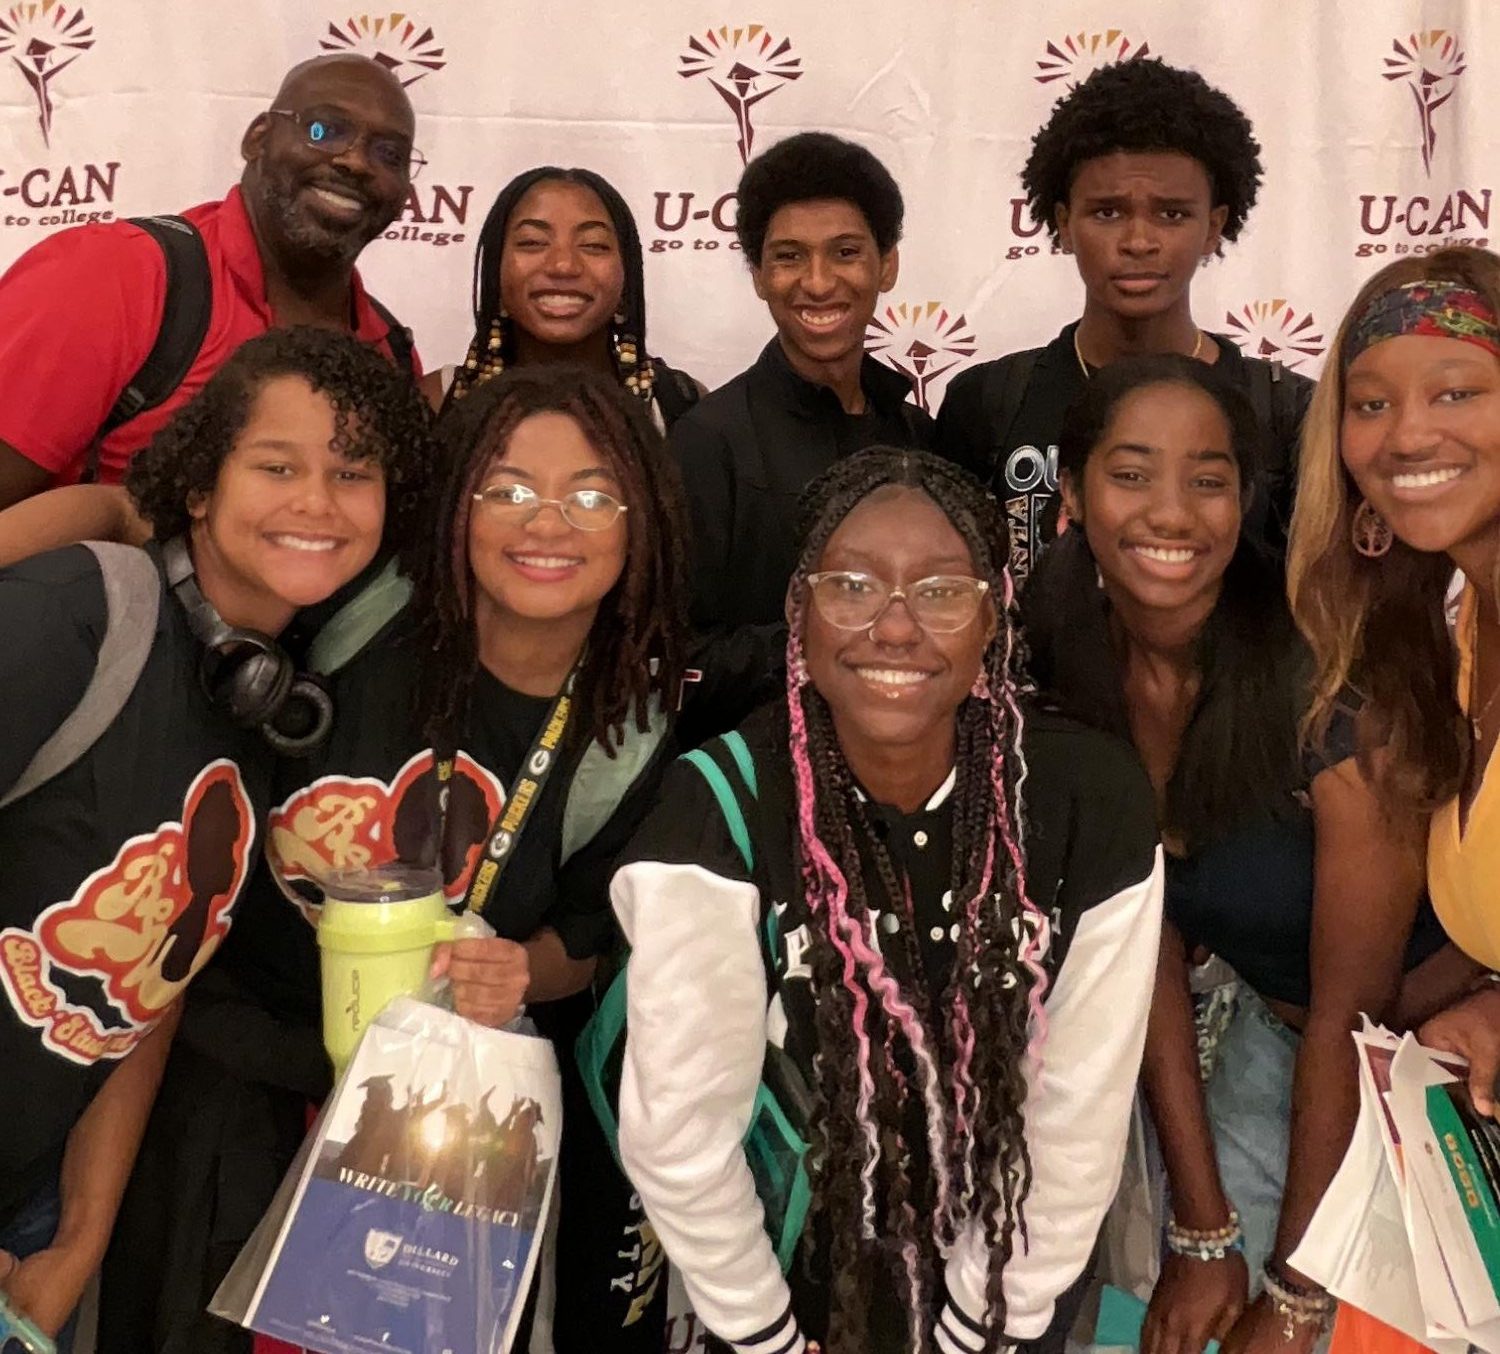 African American students from C. K. McClatchy attended the HBCU fair at Burbank High on Sept. 19